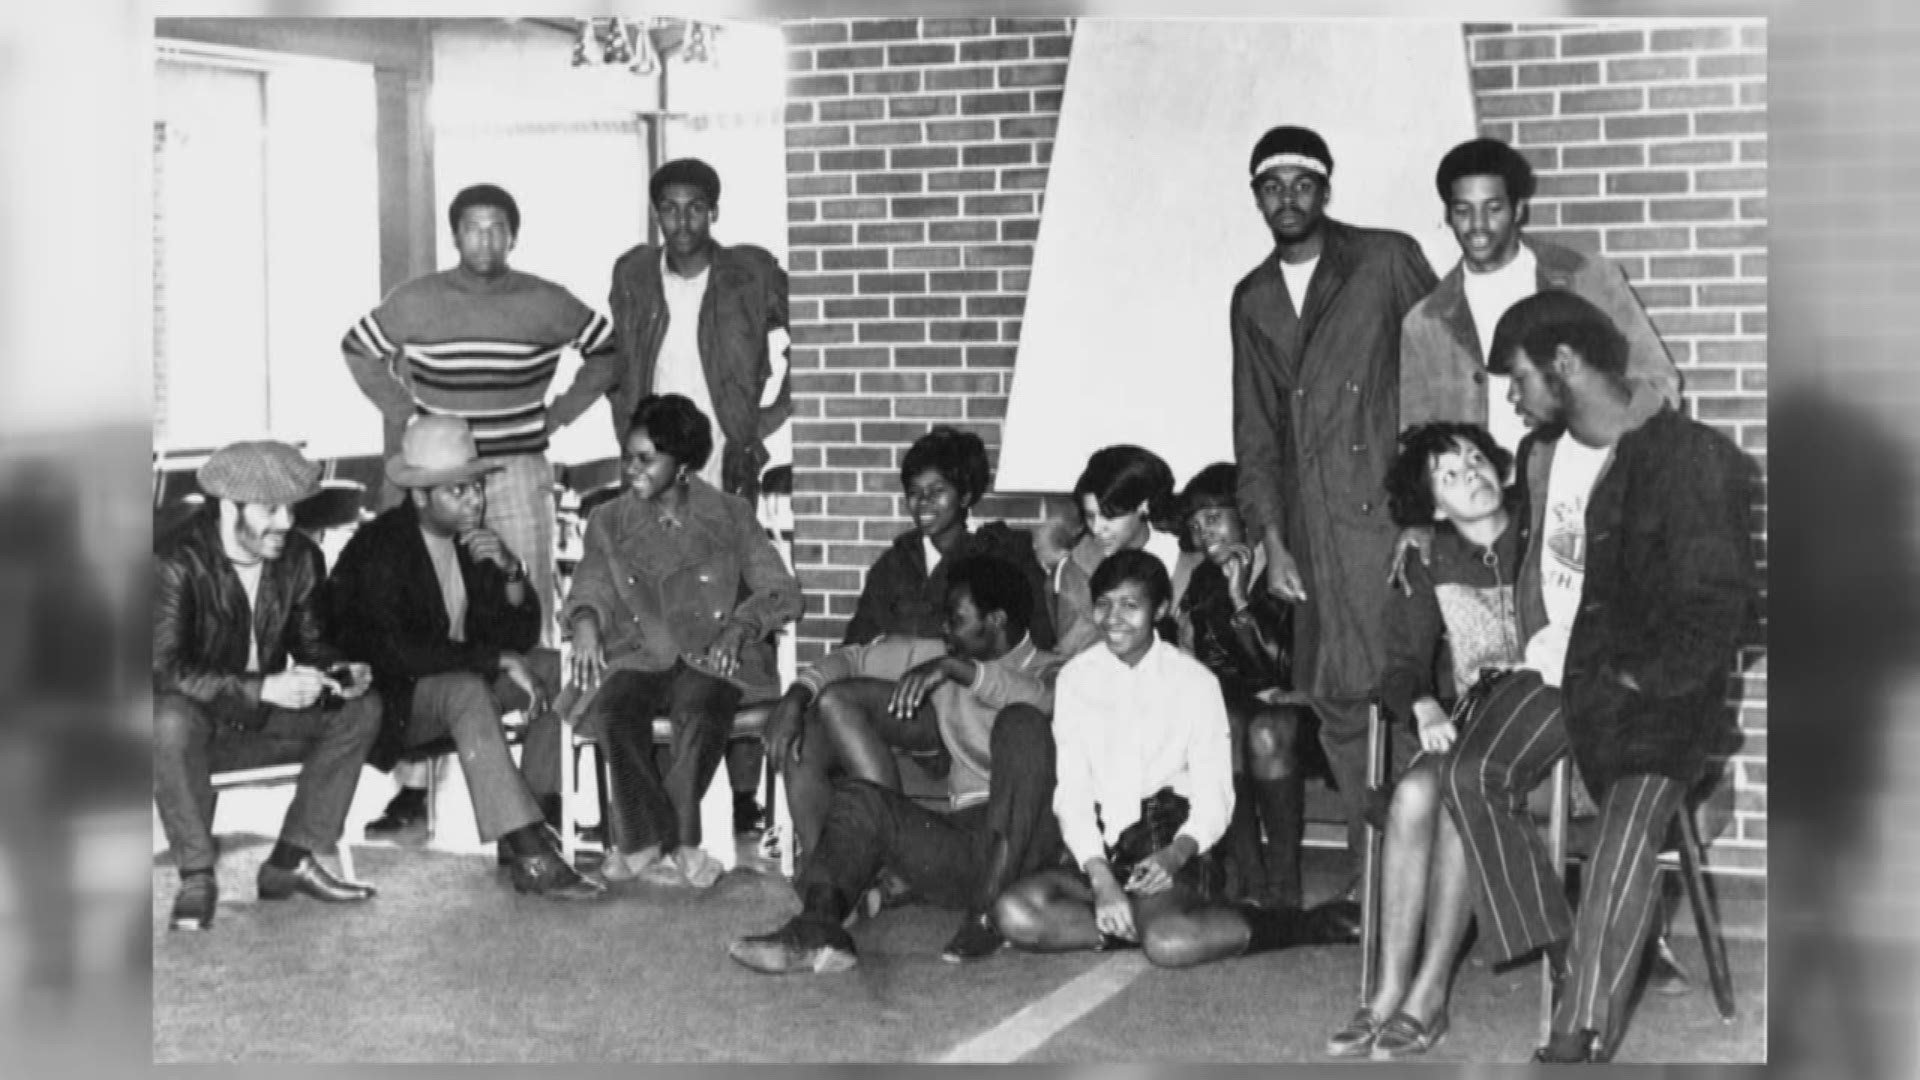 Group was created in 1969 to raise awareness for the civil rights movement.